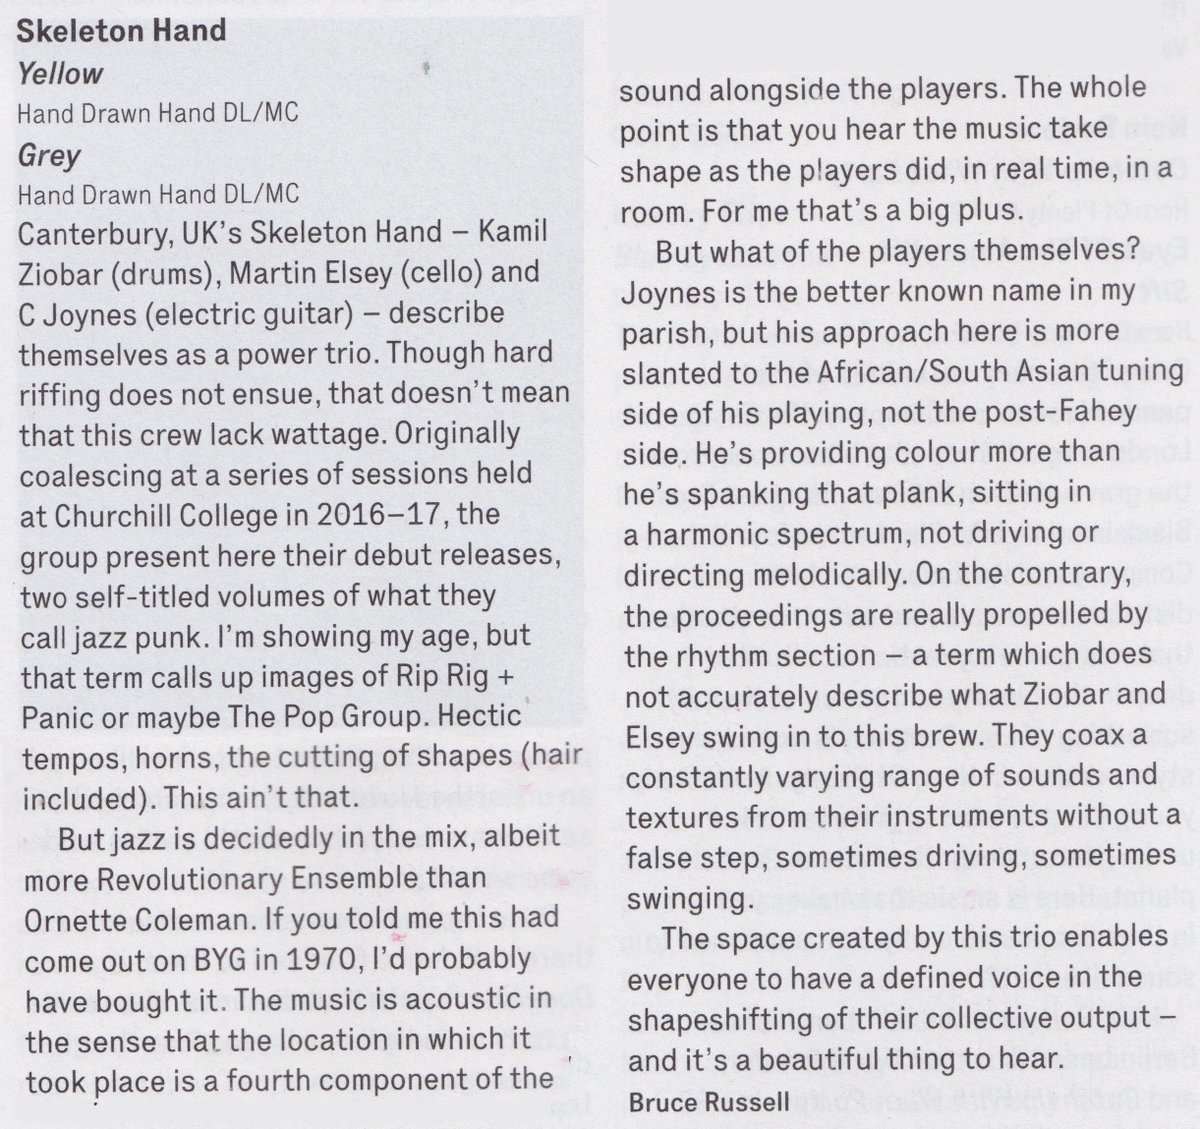 ***SKELETON HAND*** @xBrucexRussellx's take on Skeleton Hand's untitled pair of debut albums, published in @thewiremagazine 458. Both available here: …eofthebandisskeletonhand.bandcamp.com